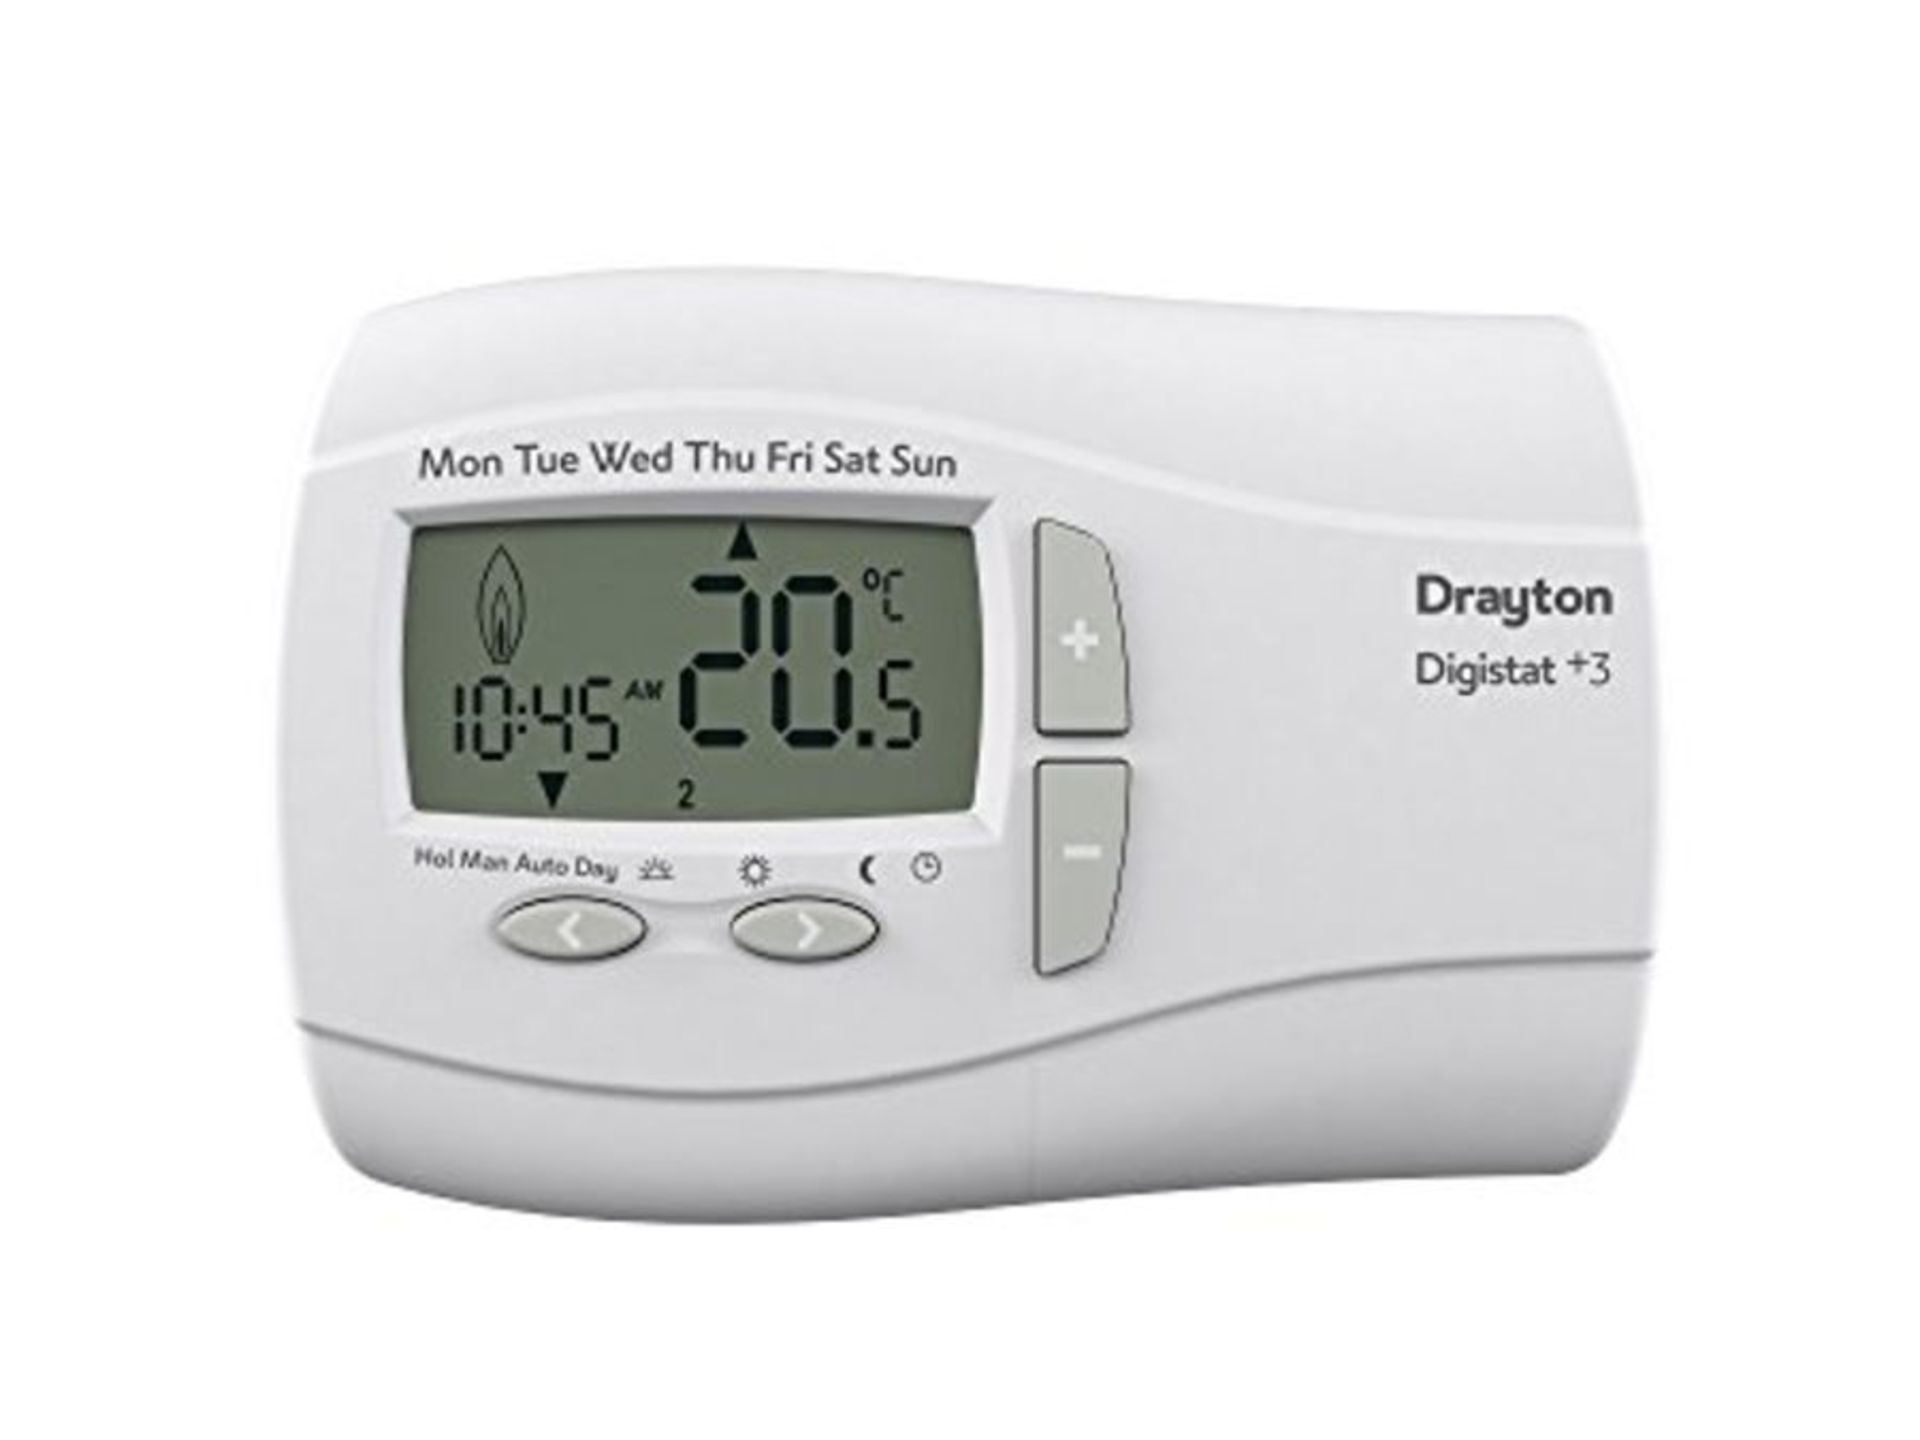 Drayton DIGISTAT +3 22083 7 Day PROGRAMMABLE Room Thermostat